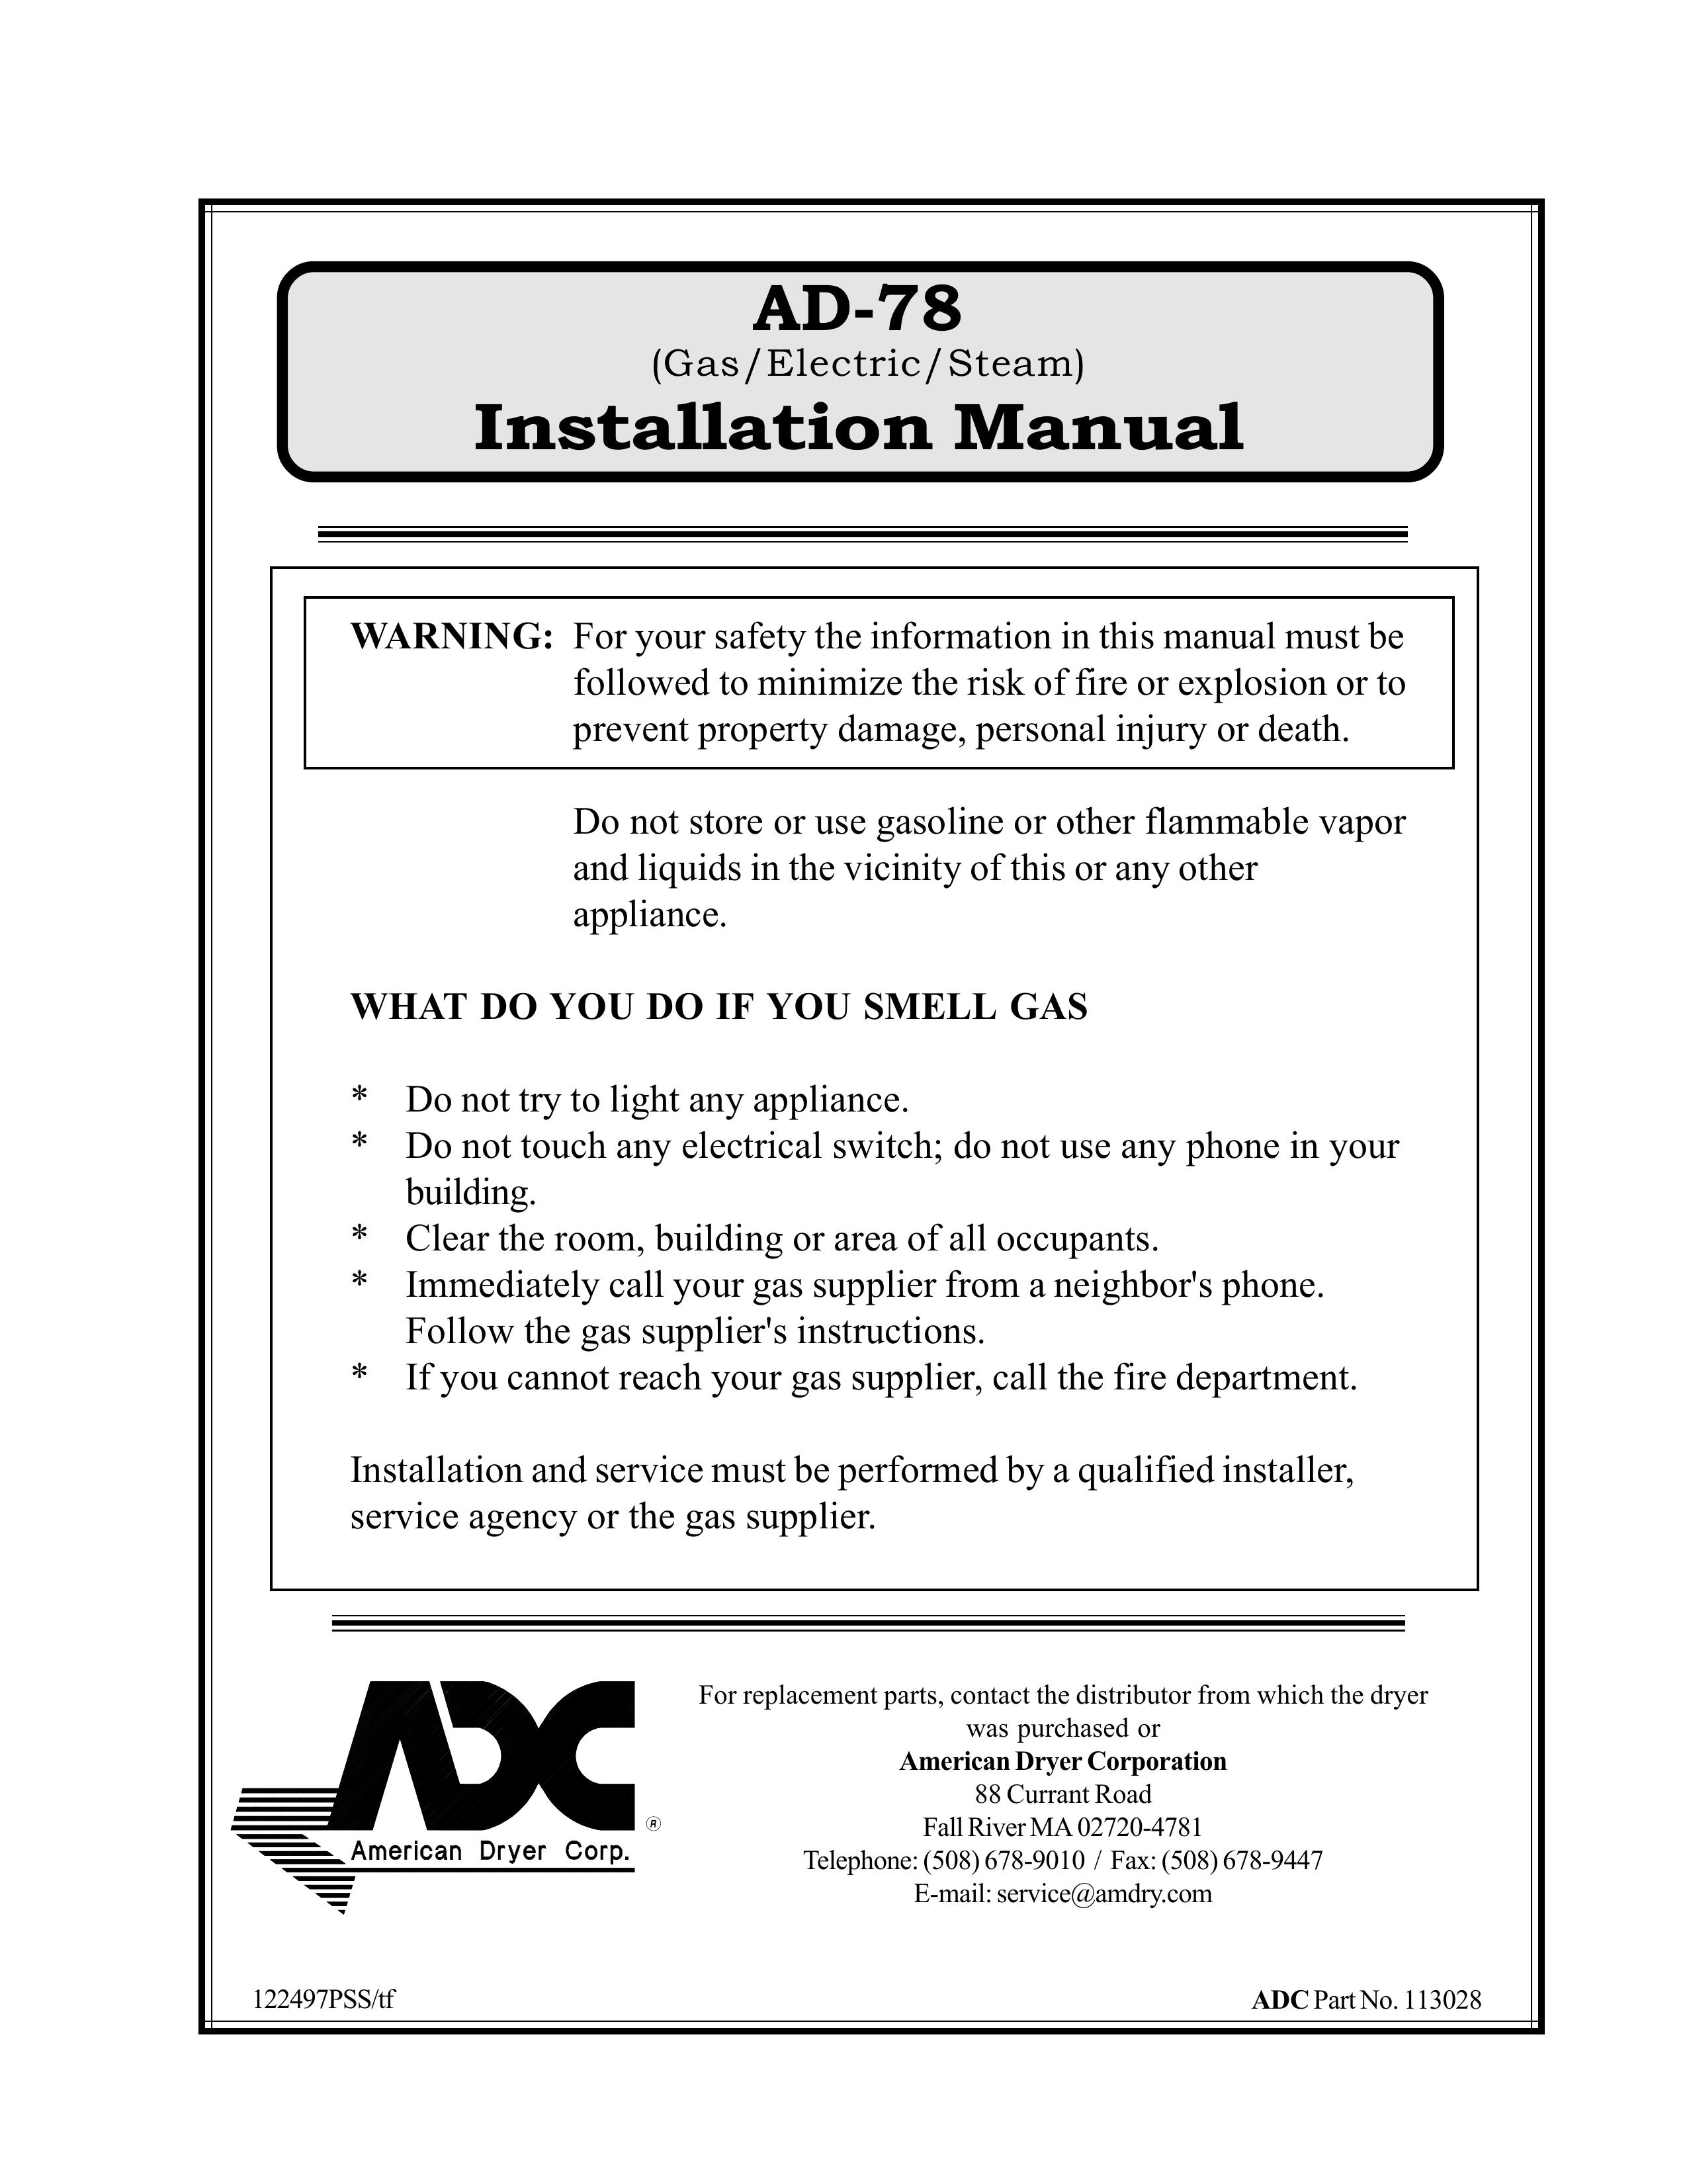 ADC AD-78 Clothes Dryer User Manual (Page 1)